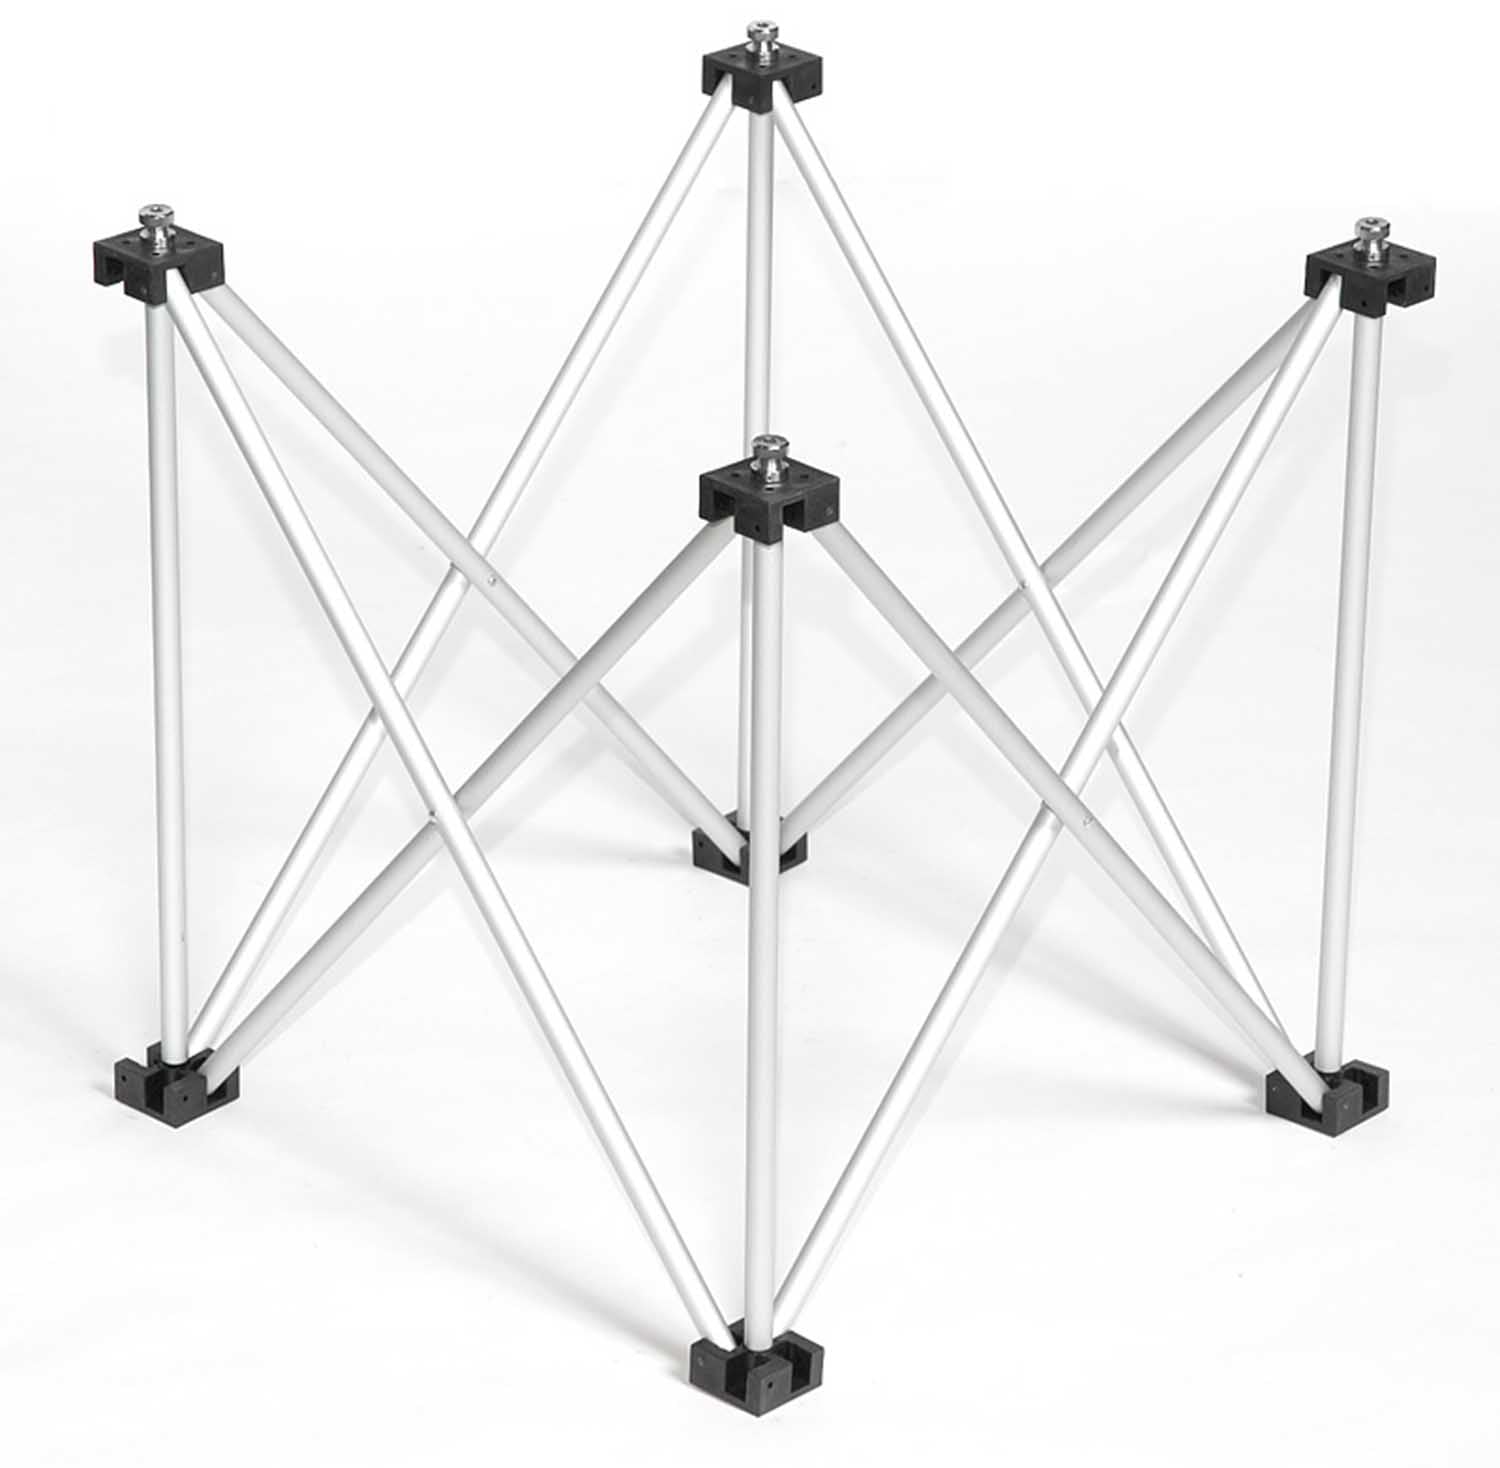 Intellistage IST4X24, 24 Inches High Equilateral Triangle Riser 4' x 4' Folding Stage Platform - Hollywood DJ